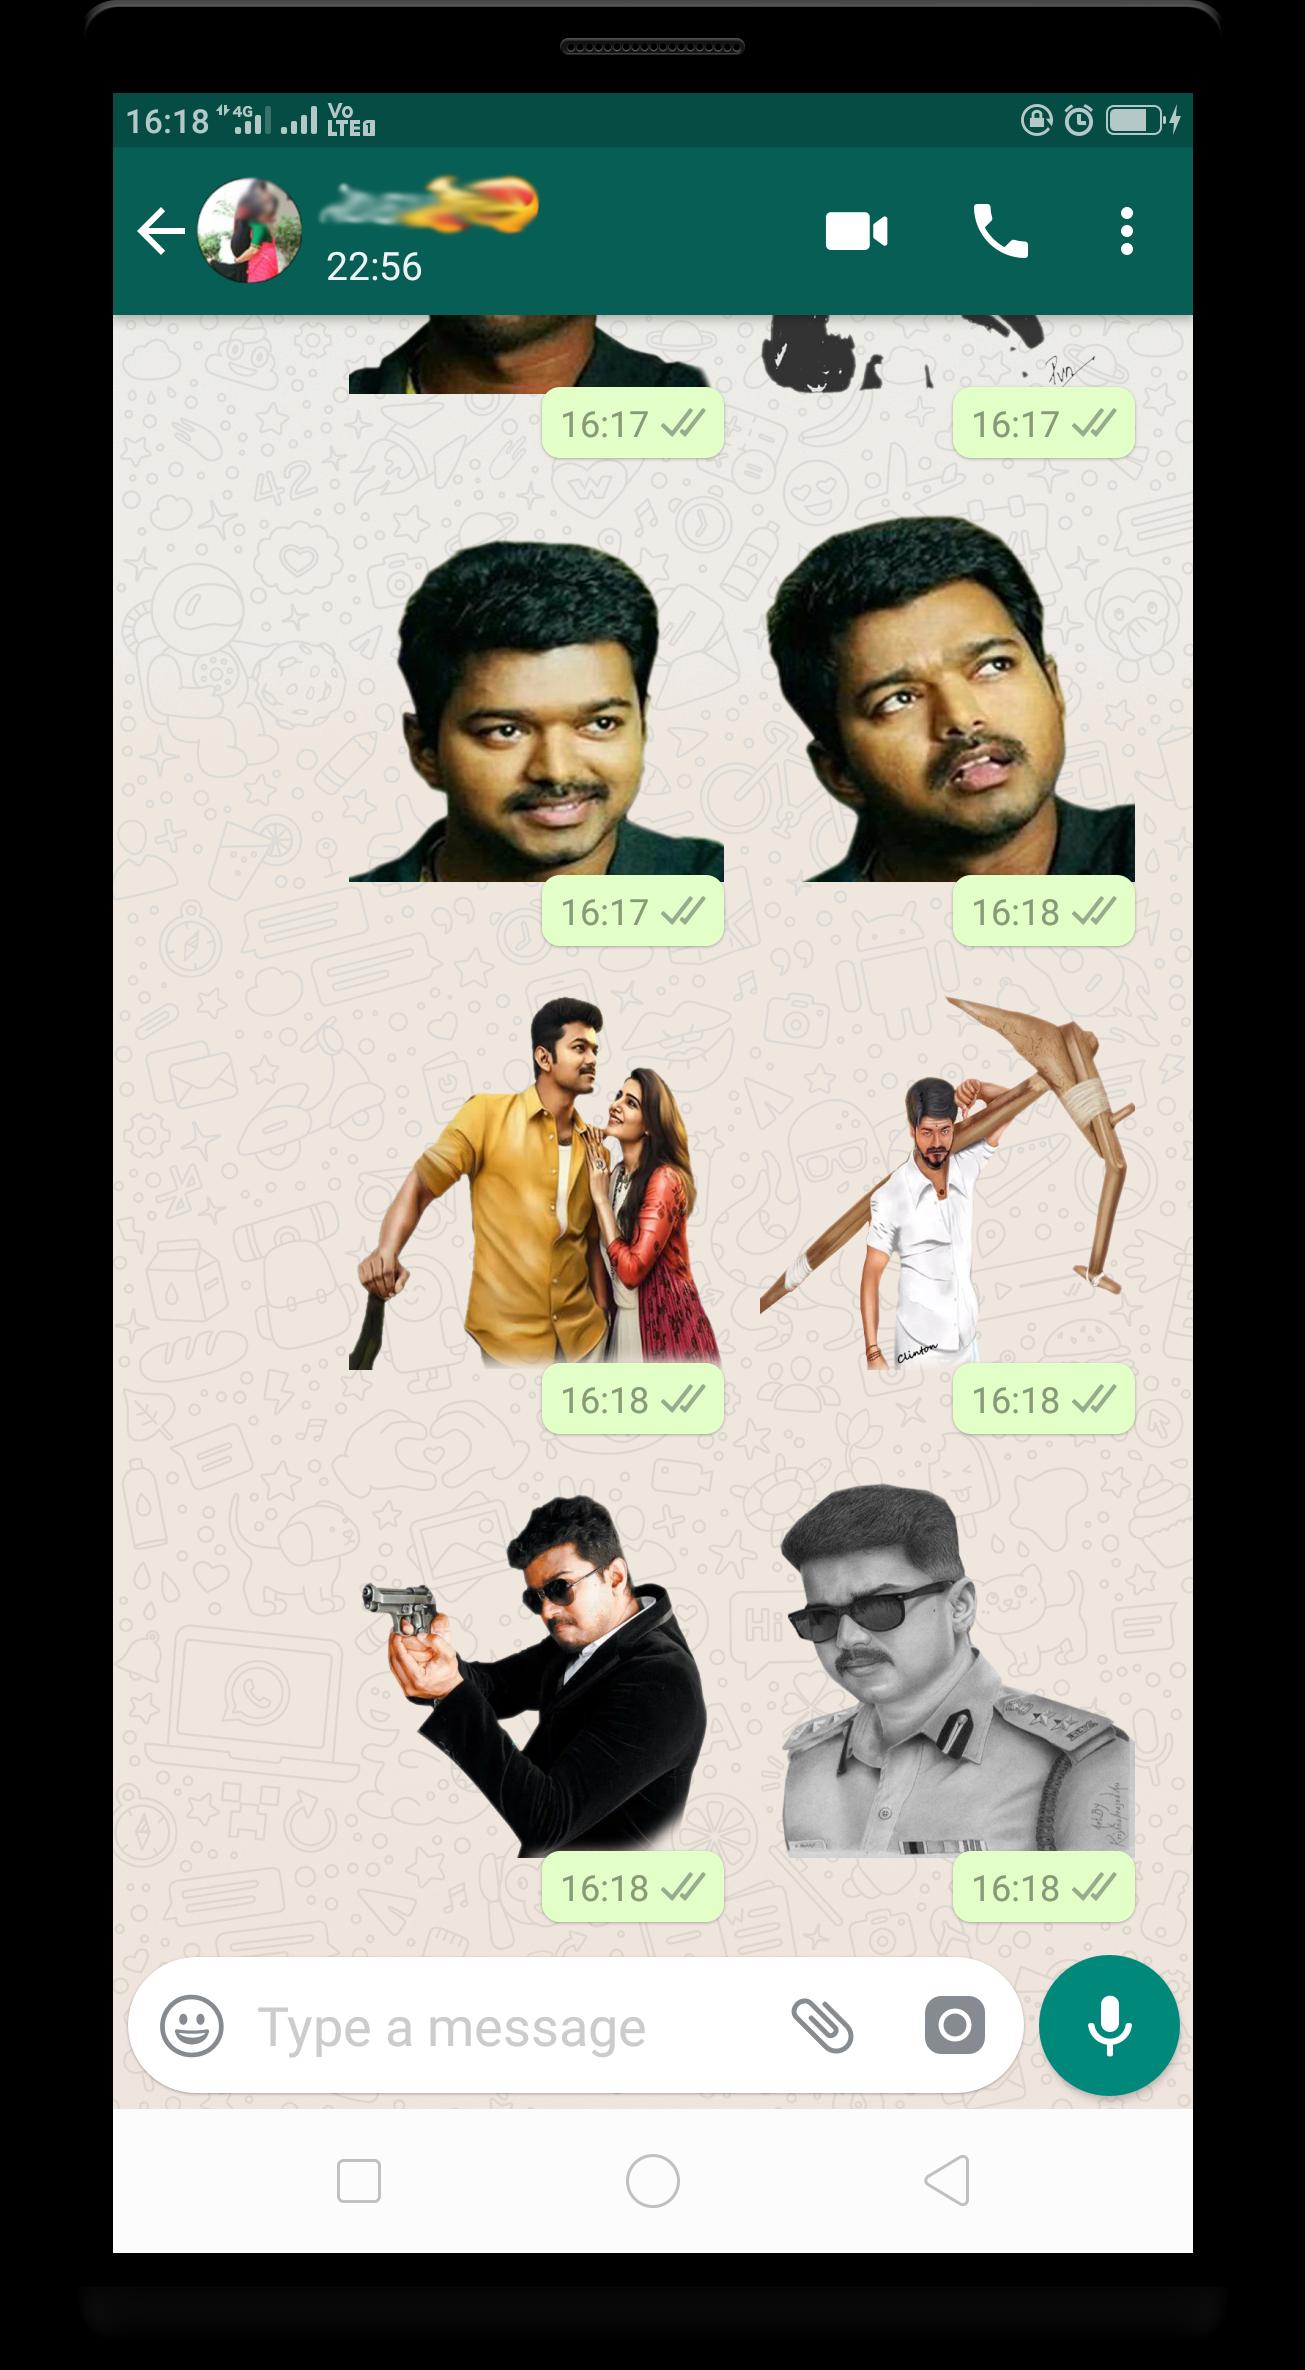 Vijay Wastickerapps Tamil Stickers For Whatsapp For Android